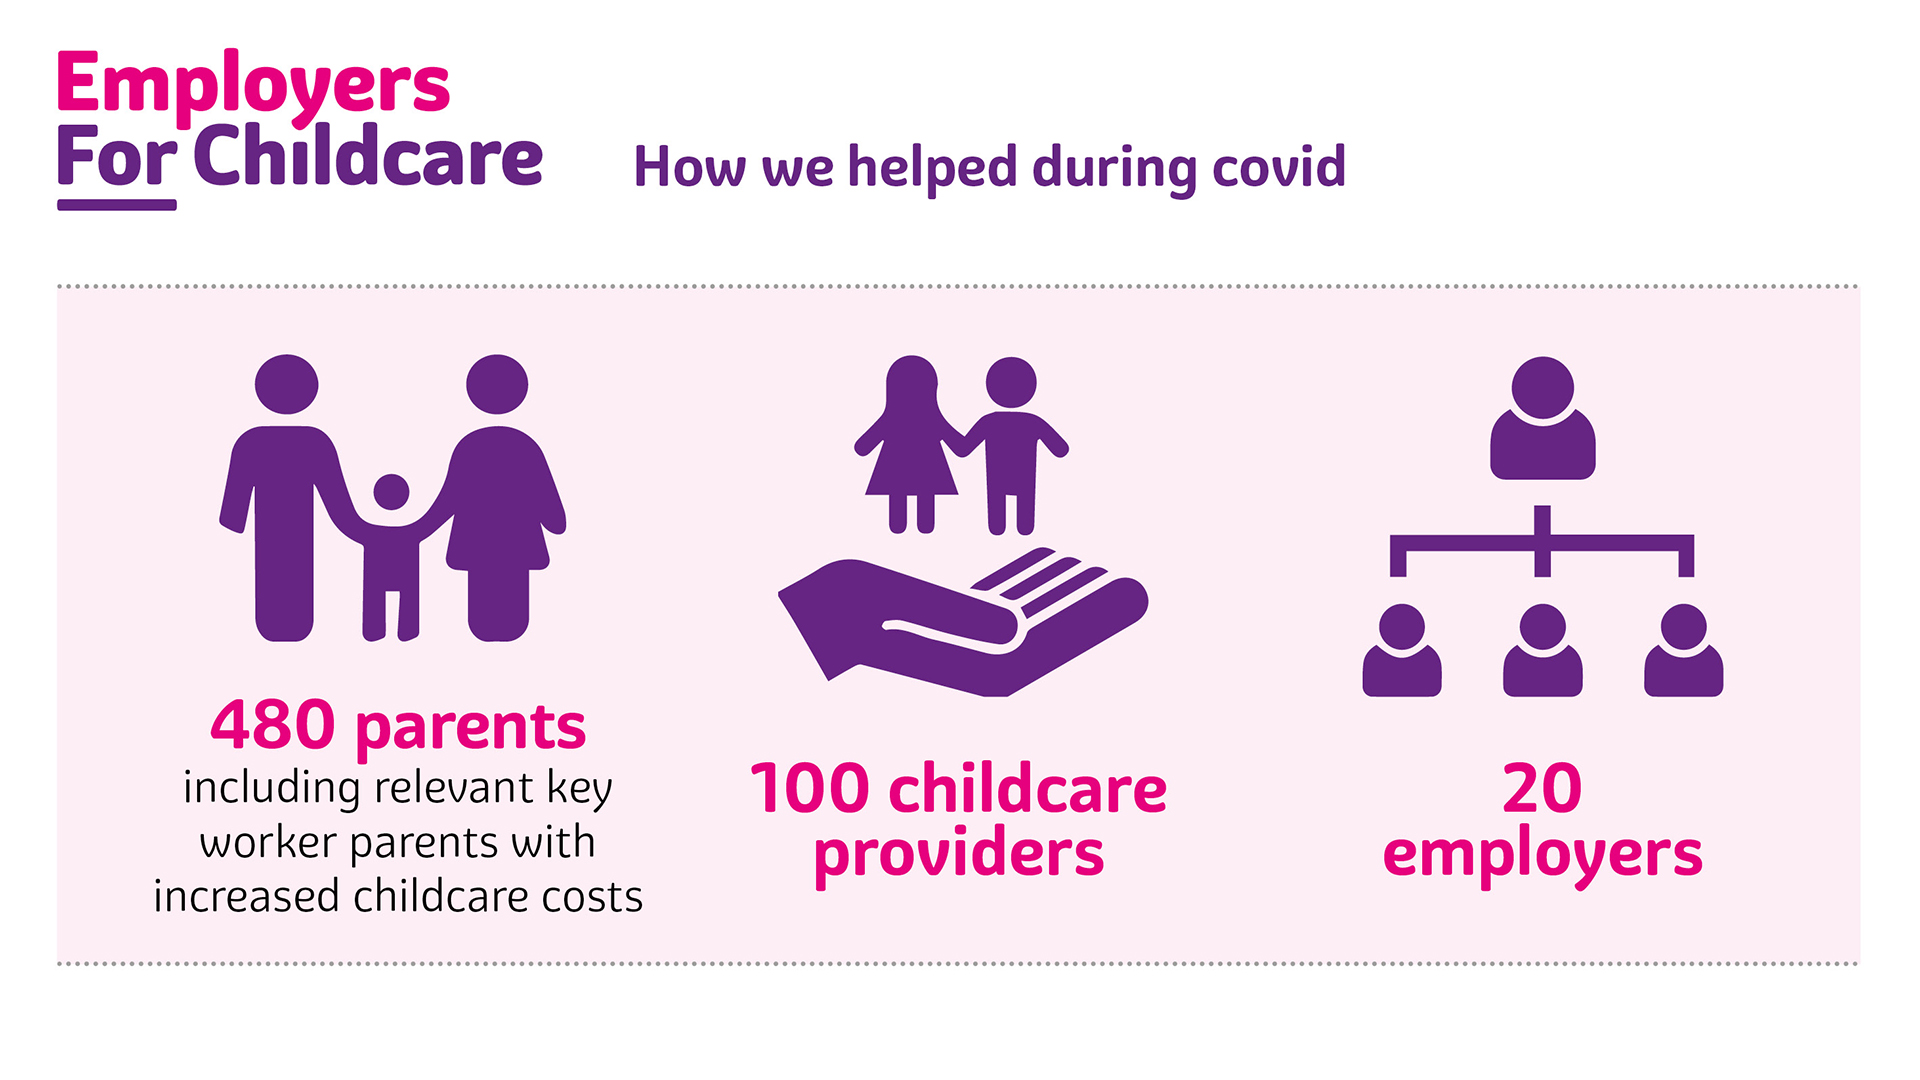 How we helped during COVID 19